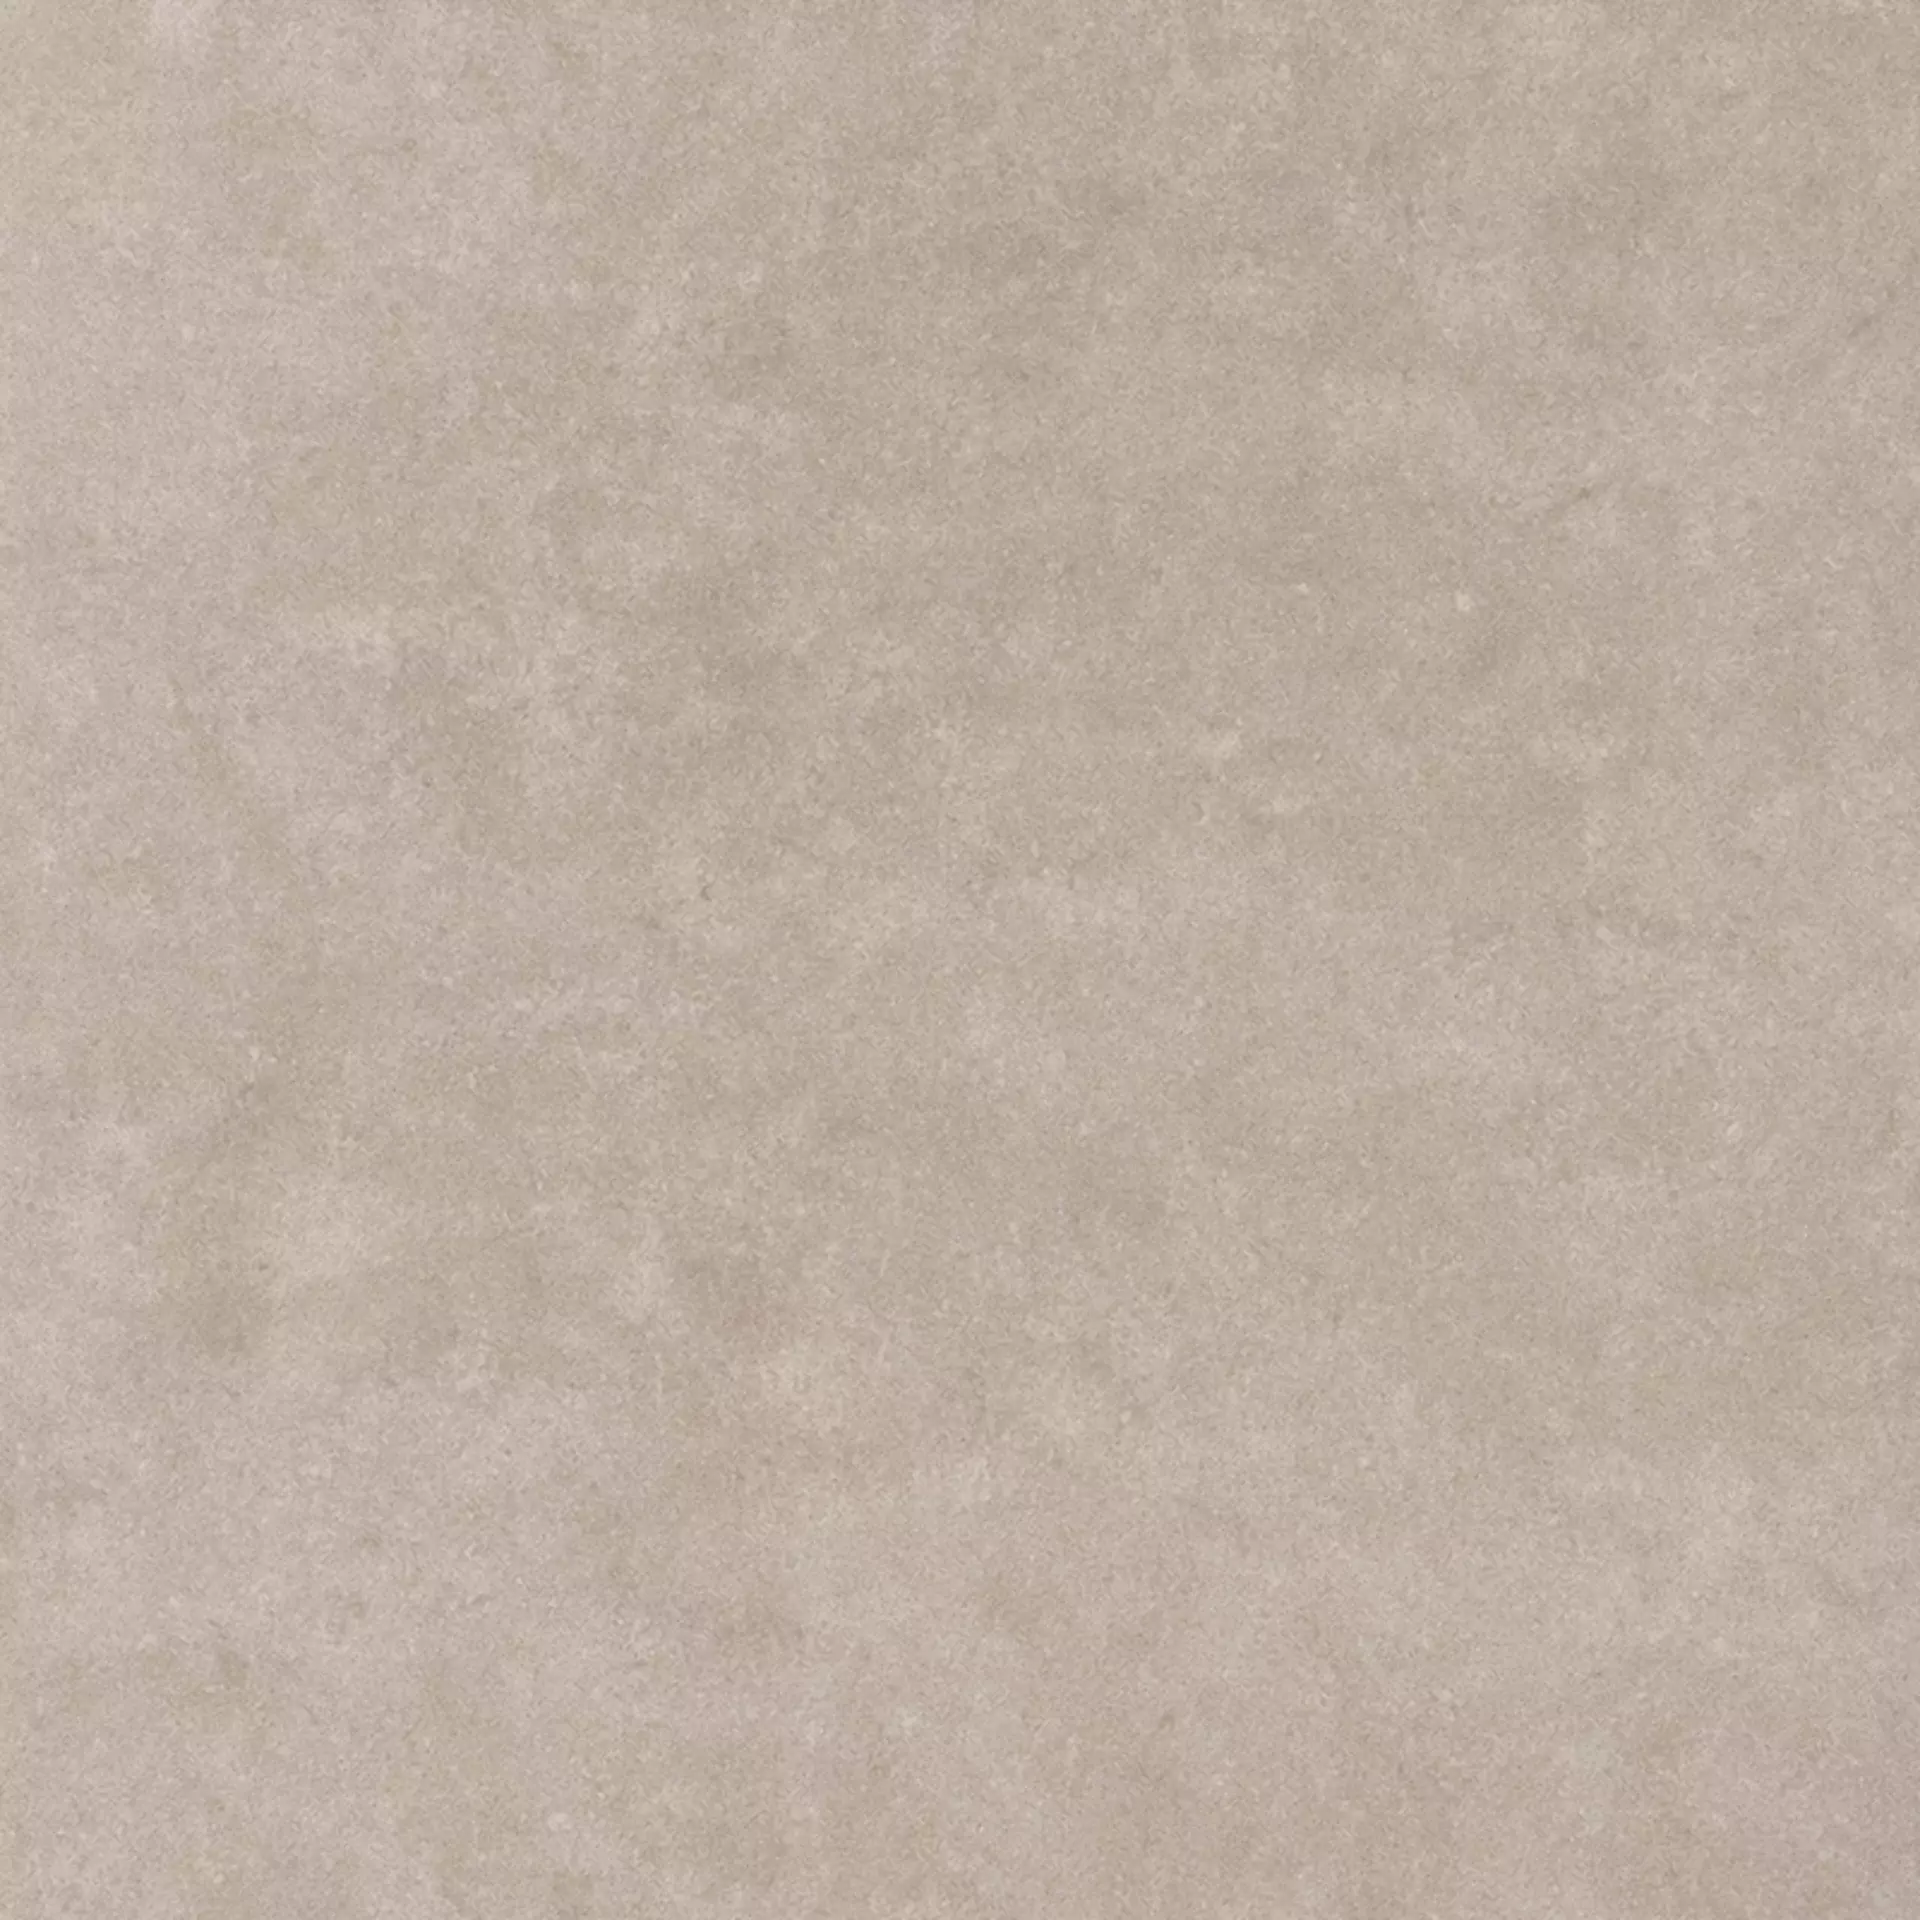 Casalgrande Timeless Taupe Levigato 14147049 60x120cm rectified 9mm